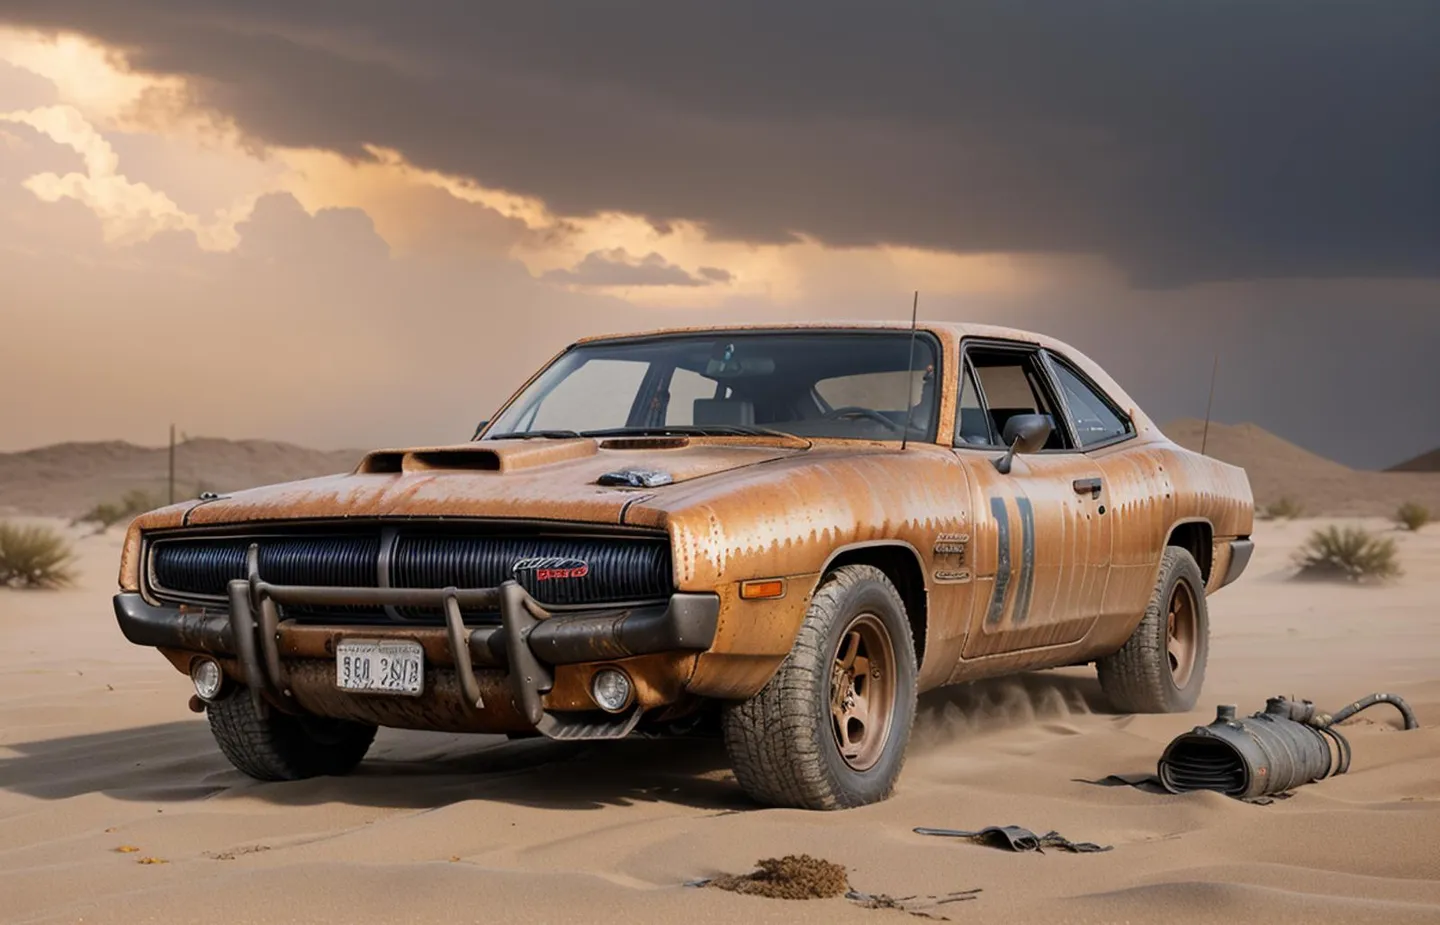 A rusty, post-apocalyptic car in a desert landscape with a dramatic sky, AI generated image using Stable Diffusion.